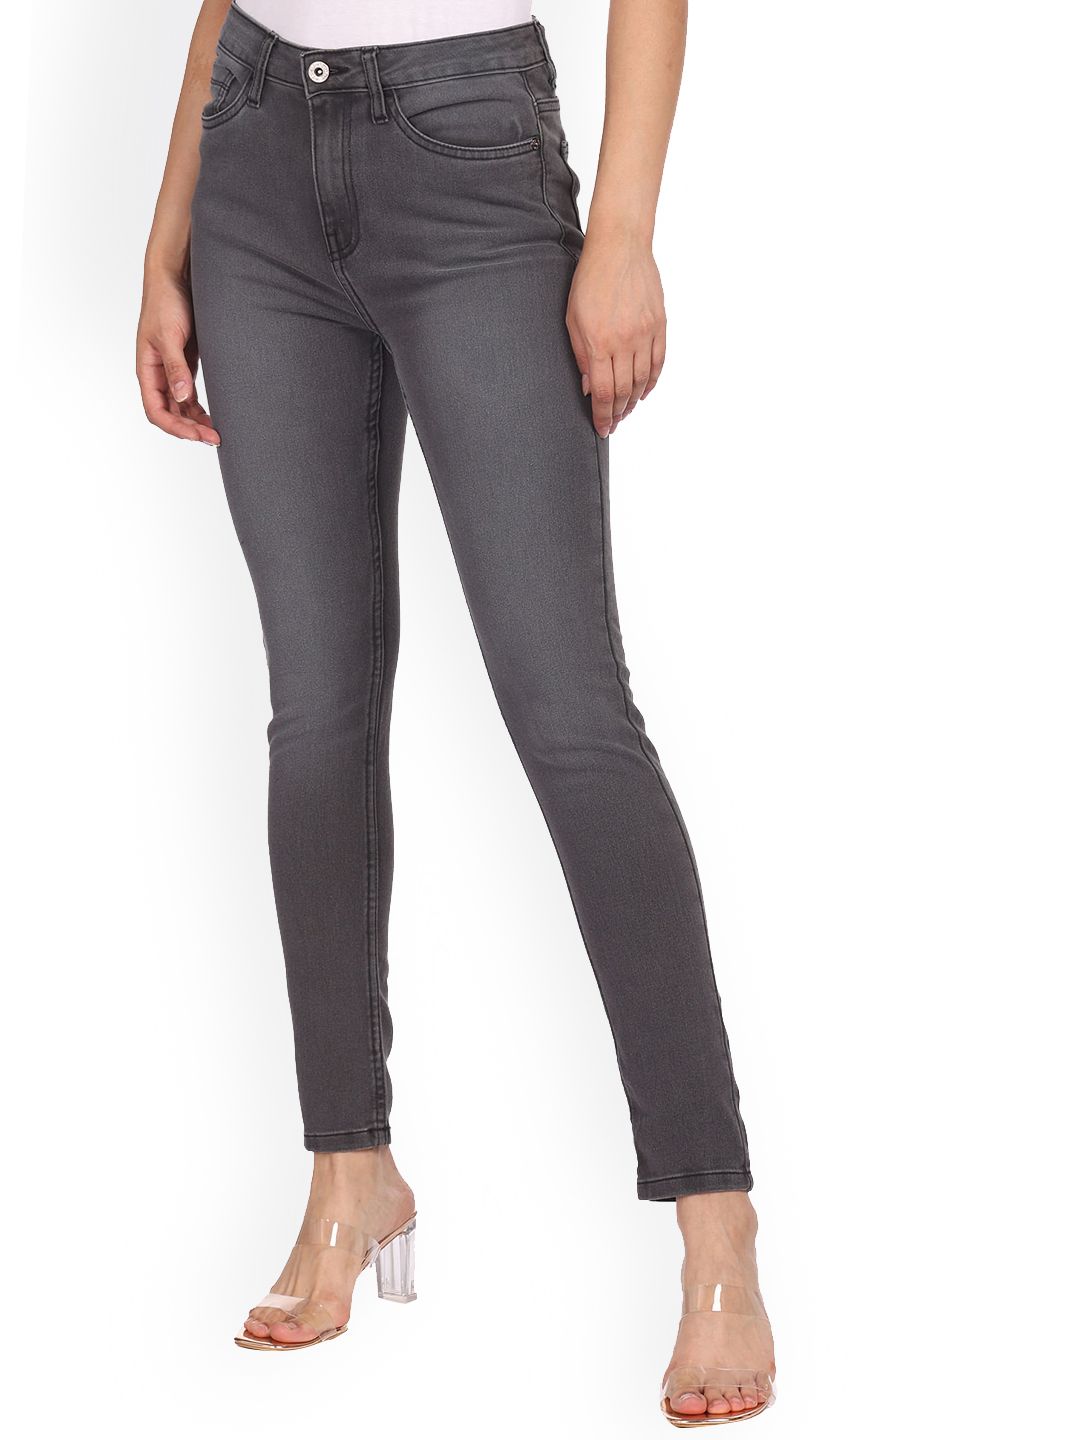 Sugr Grey Regular Fit Cropped Jeans Price in India